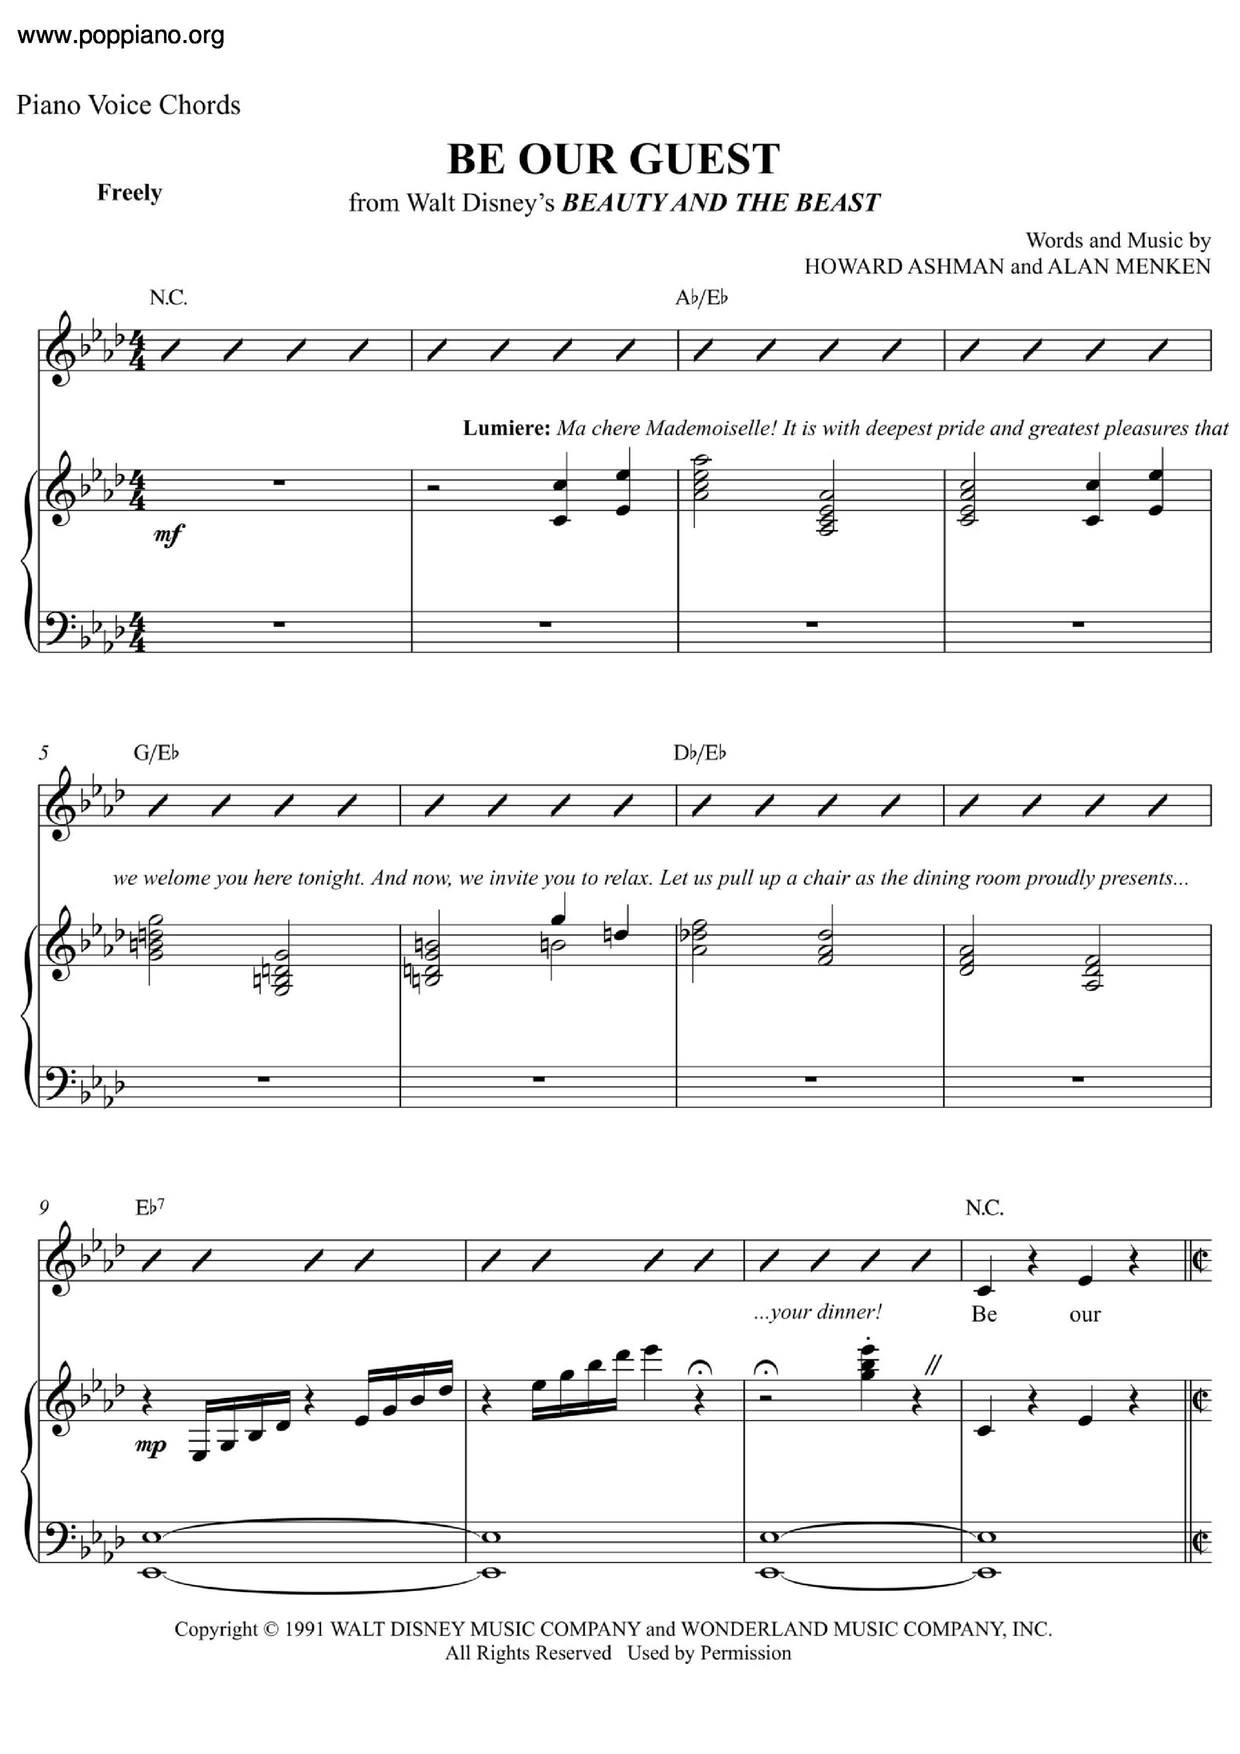 Beauty And The Beast Be Our Guest Sheet Music Piano Score Free Pdf Download Hk Pop Piano Academy